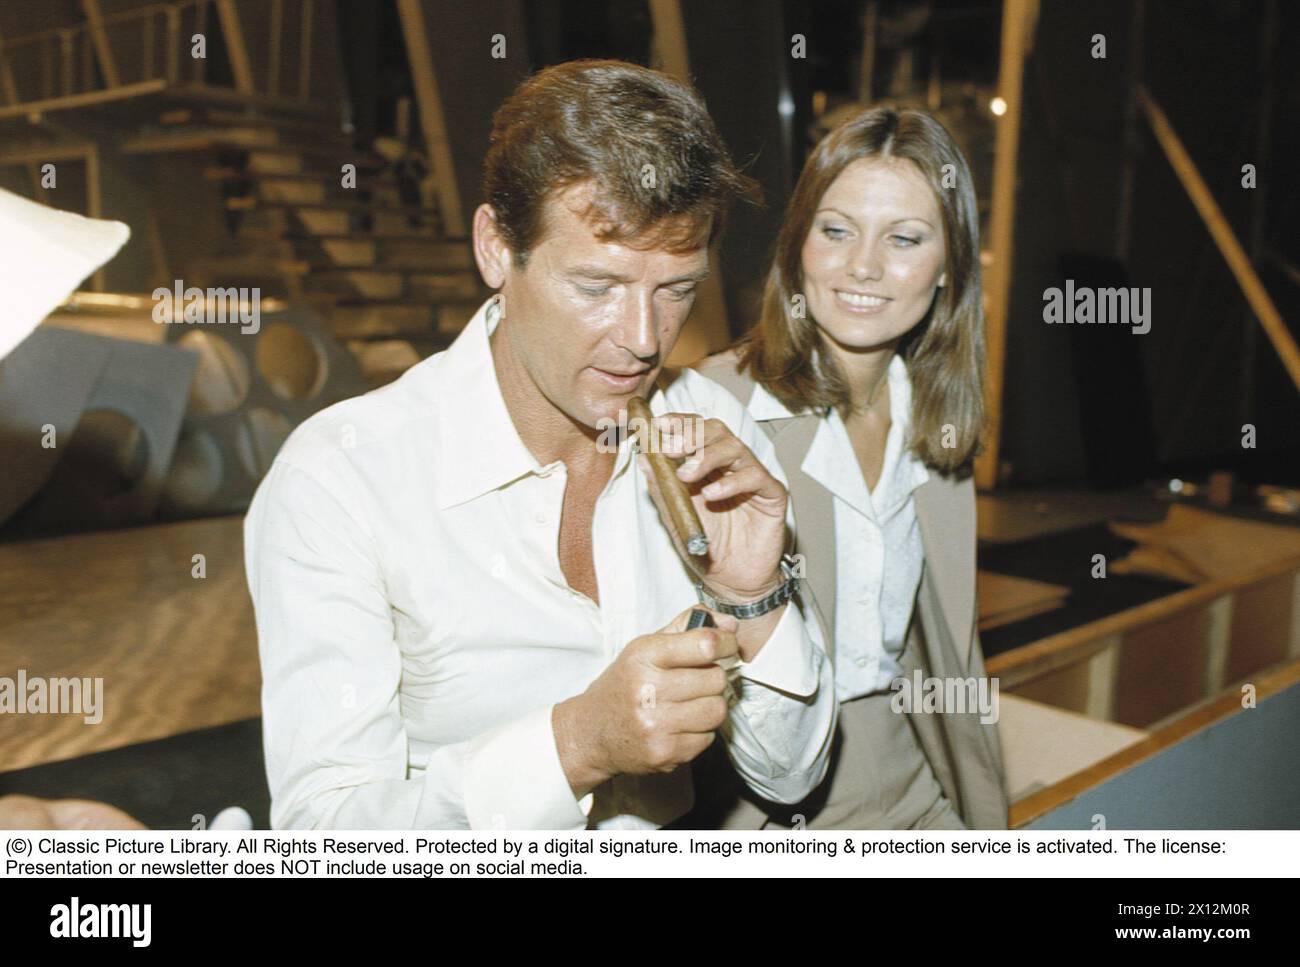 Sir Roger Moore , 1927-2017 during a media event in connection with the recording of the feature film The man with the golden gun at Pinewood studios. Roger Moore is known for his role as agent James Bond, playing the character in seven feature films.  Actress Maud Adams plays the role of Andrea Anders in the movie. 1974. Stock Photo